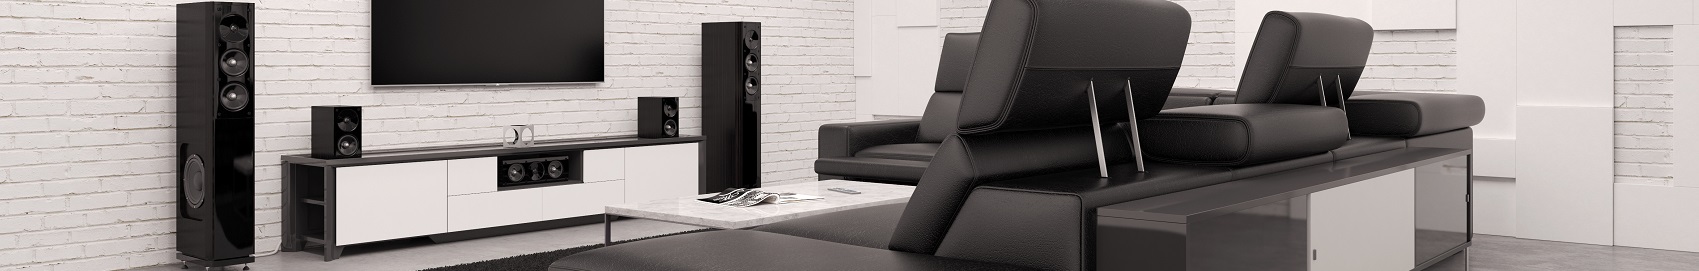 Cable Management Tips for Your Home Theatre System